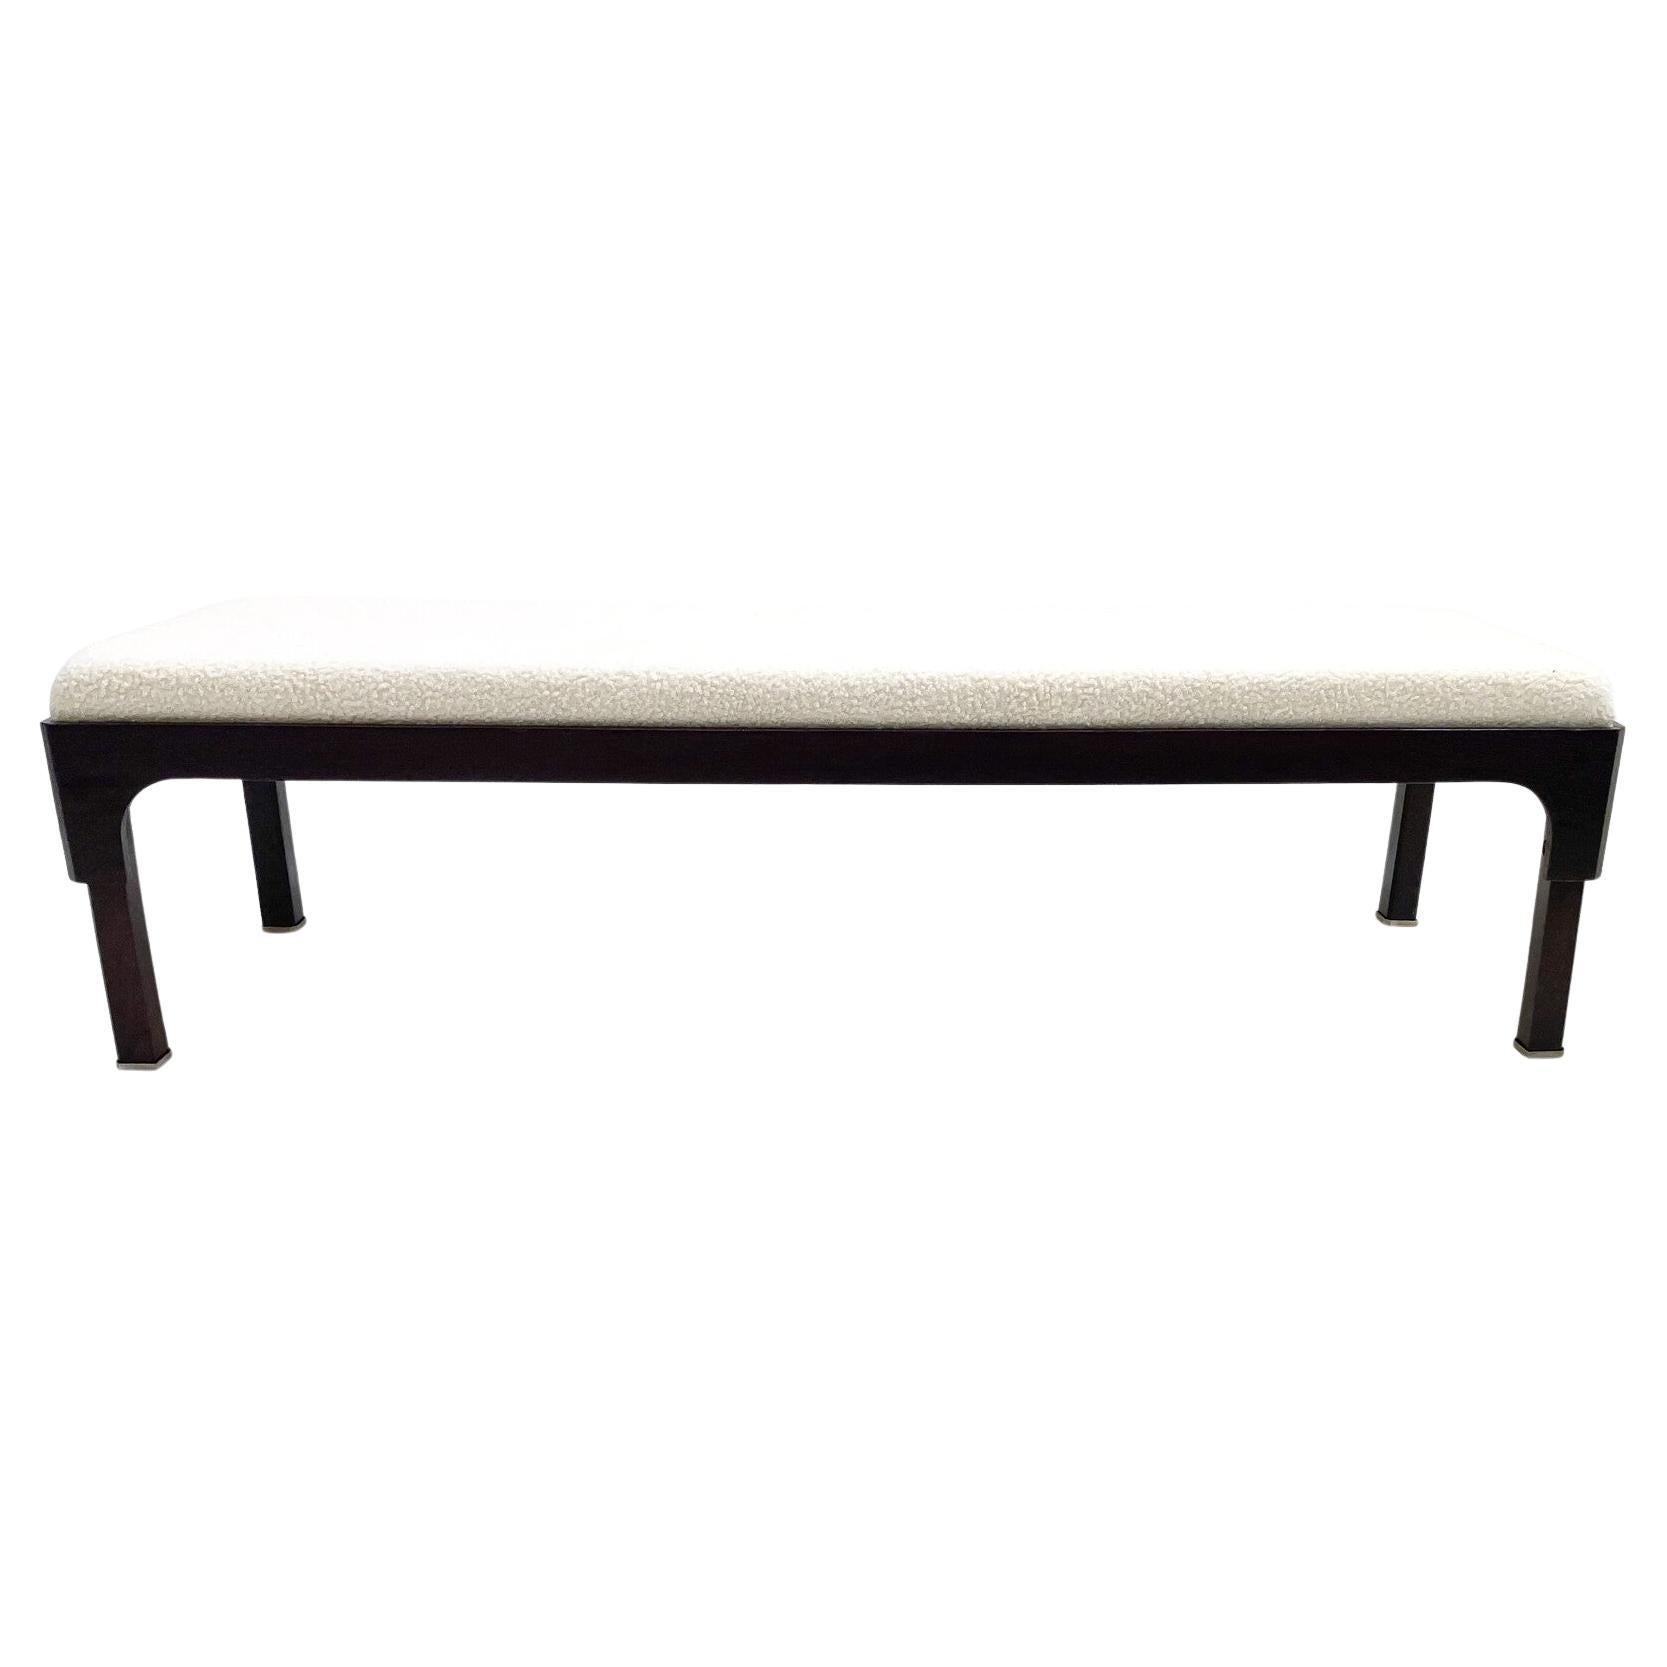 Mid-Century Modern Bench, Wood and White Bouclé Fabric, Italy, 1960s